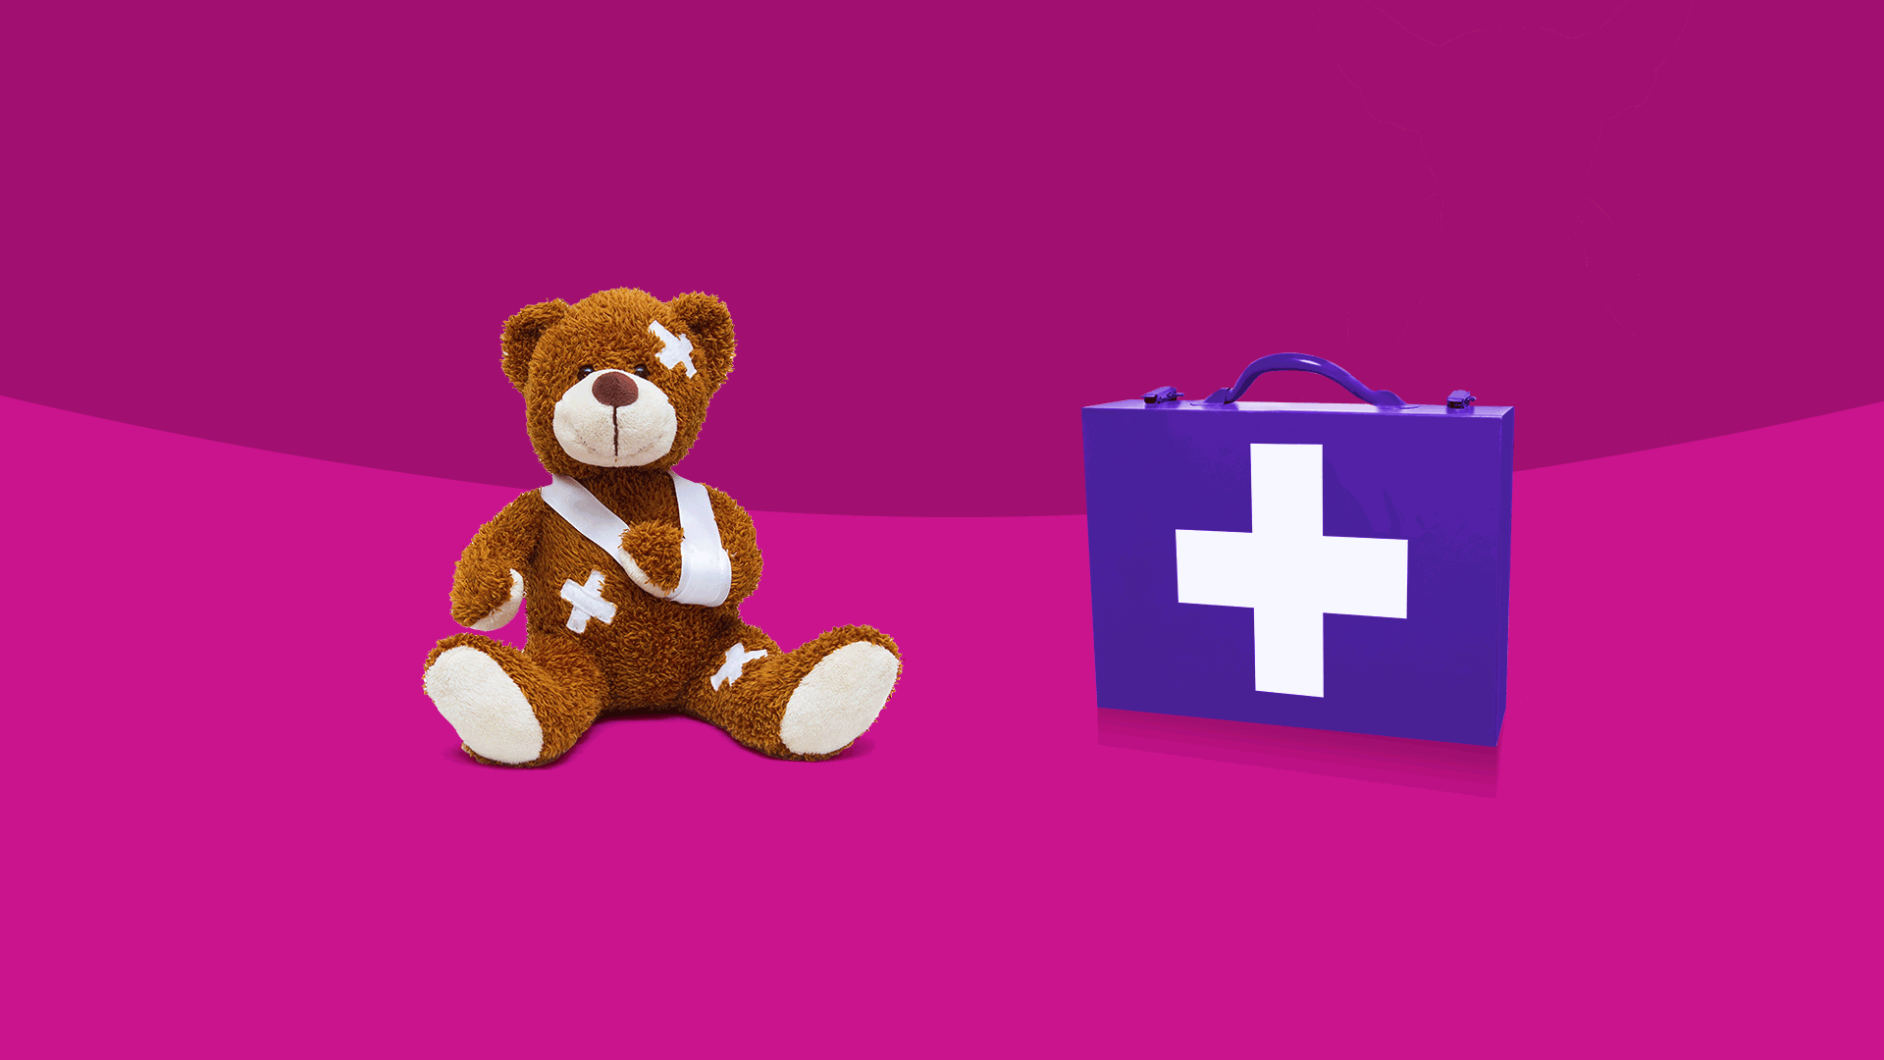 Kids Emergency Injury - teddy bear and first aid kit